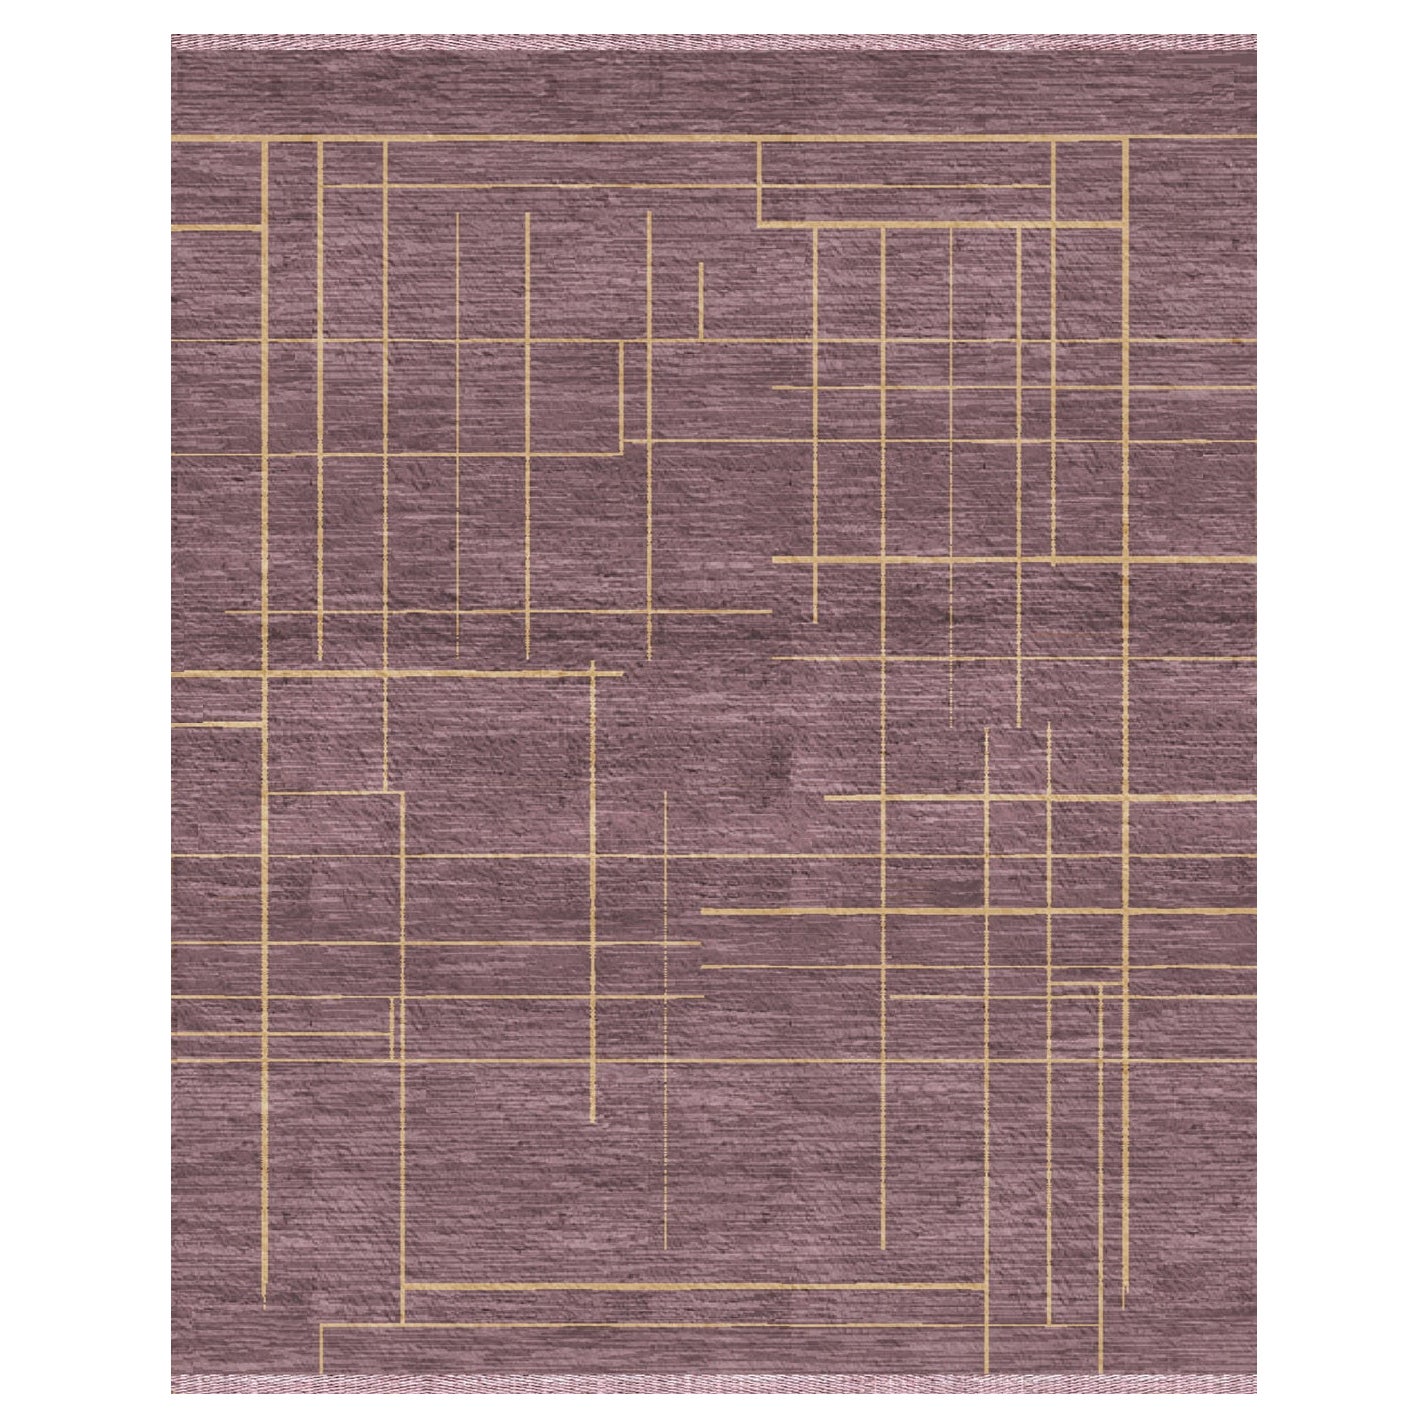 Nazmiyal Collection Geometric Modern Transitional Rug. 5 ft 10 in x 9 ft 5 in